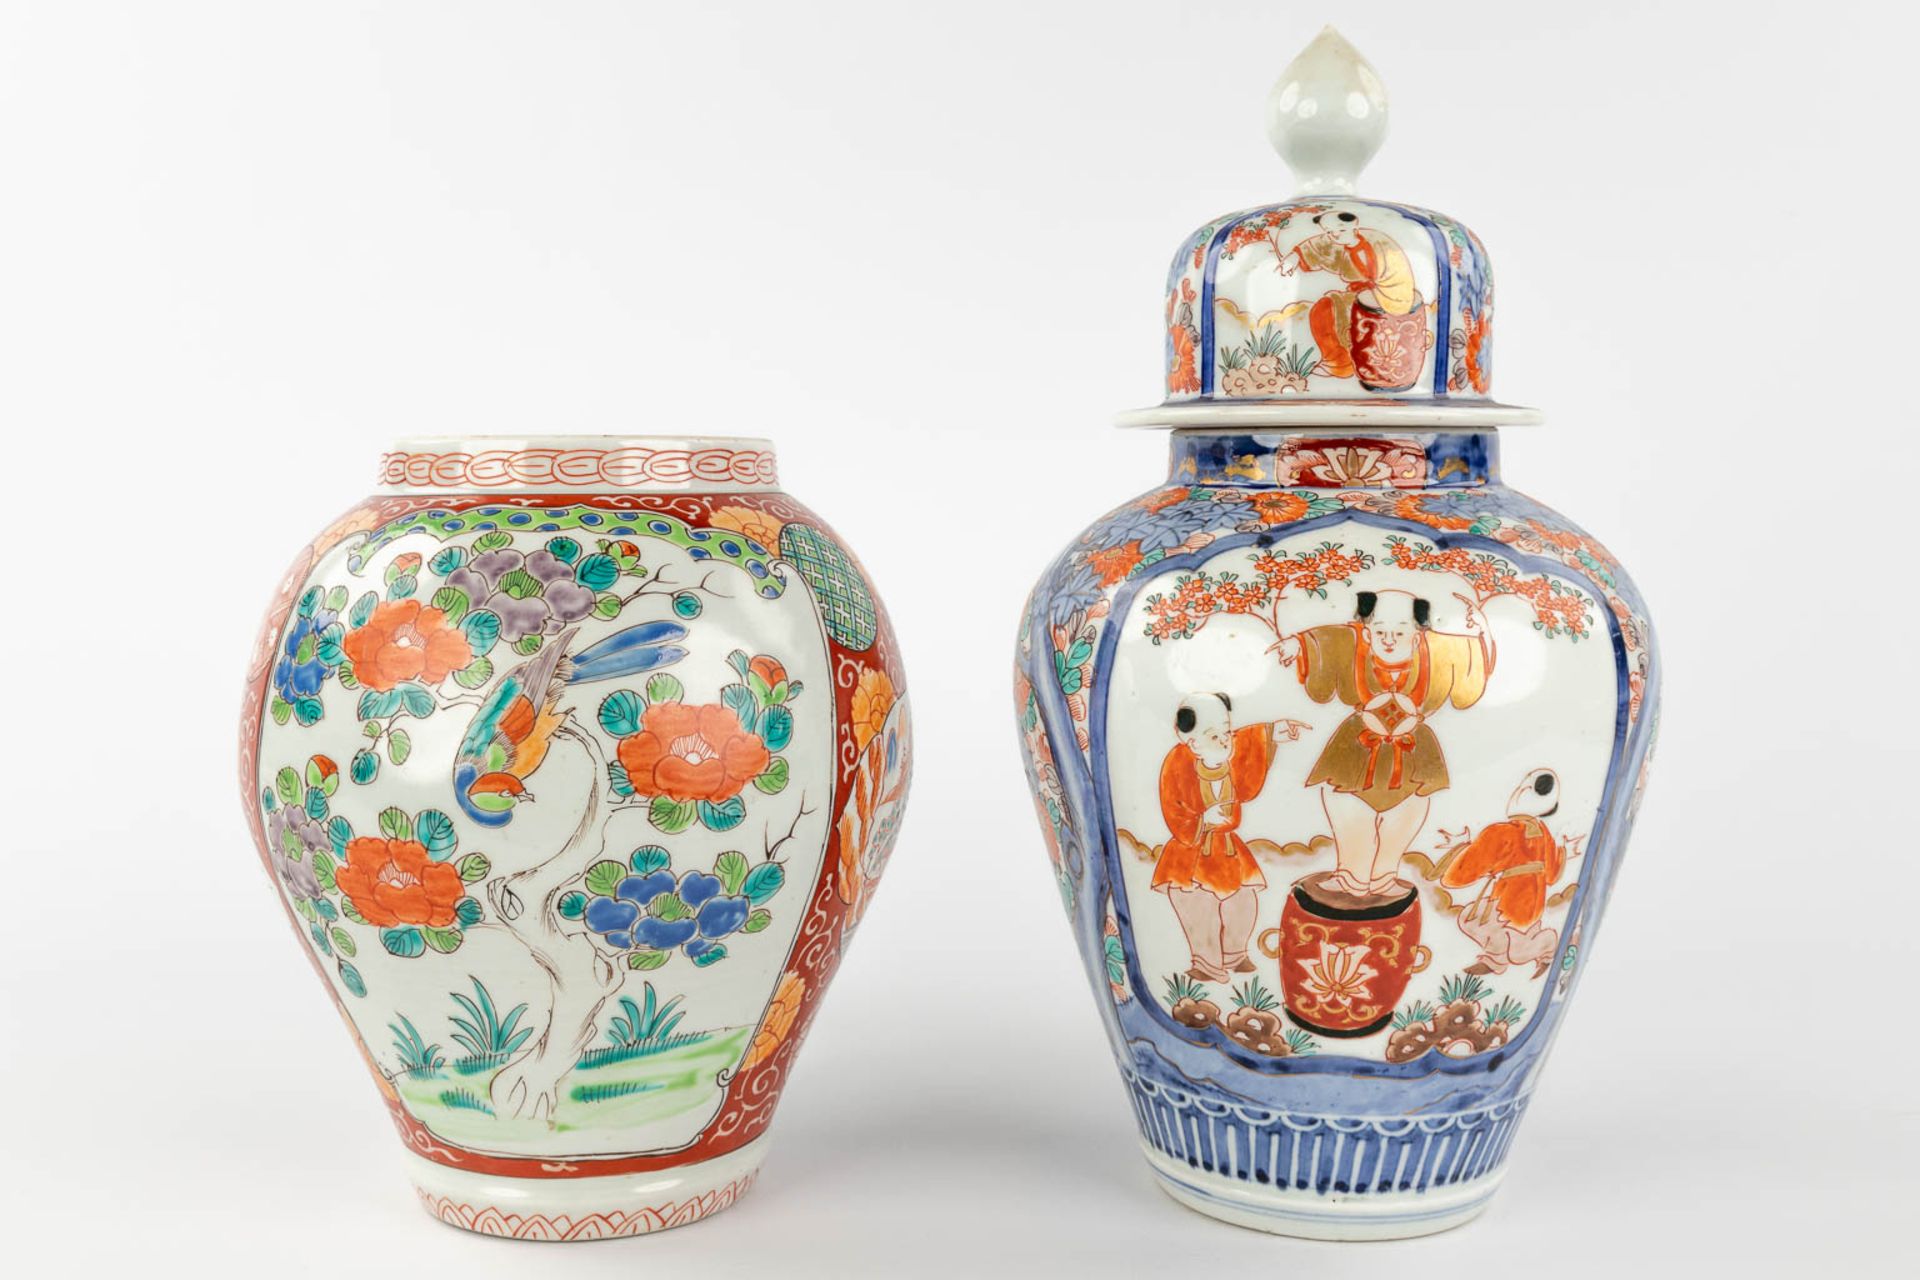 An assembled collection of Japanese Imari and Kutani porcelain. 19th/20th century. (H: 35 x D: 19 cm - Image 10 of 22